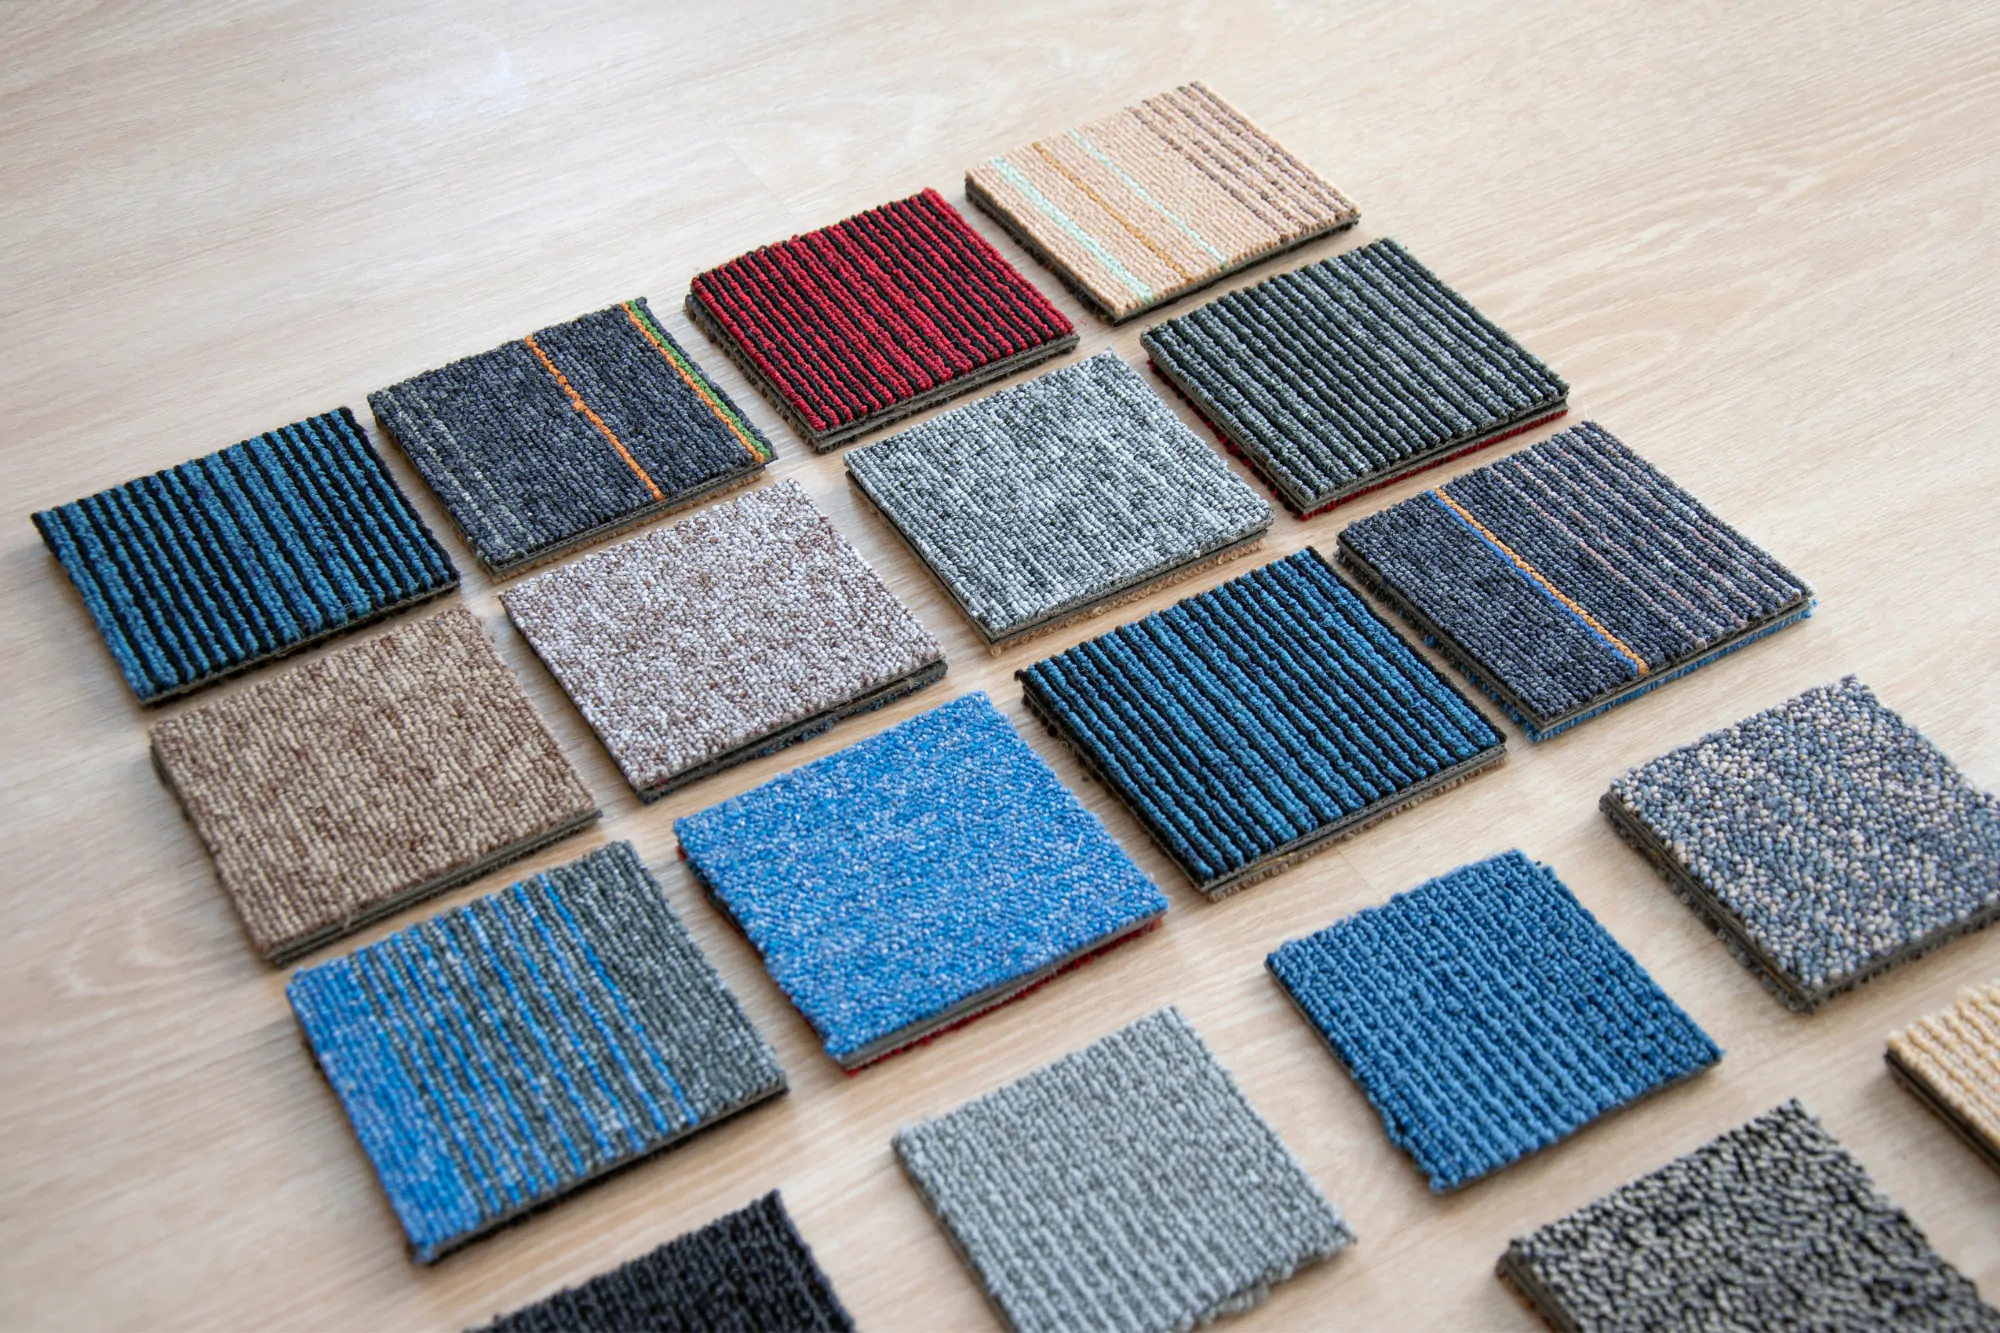 Samples of different Carpet Tiles patterns and Colours